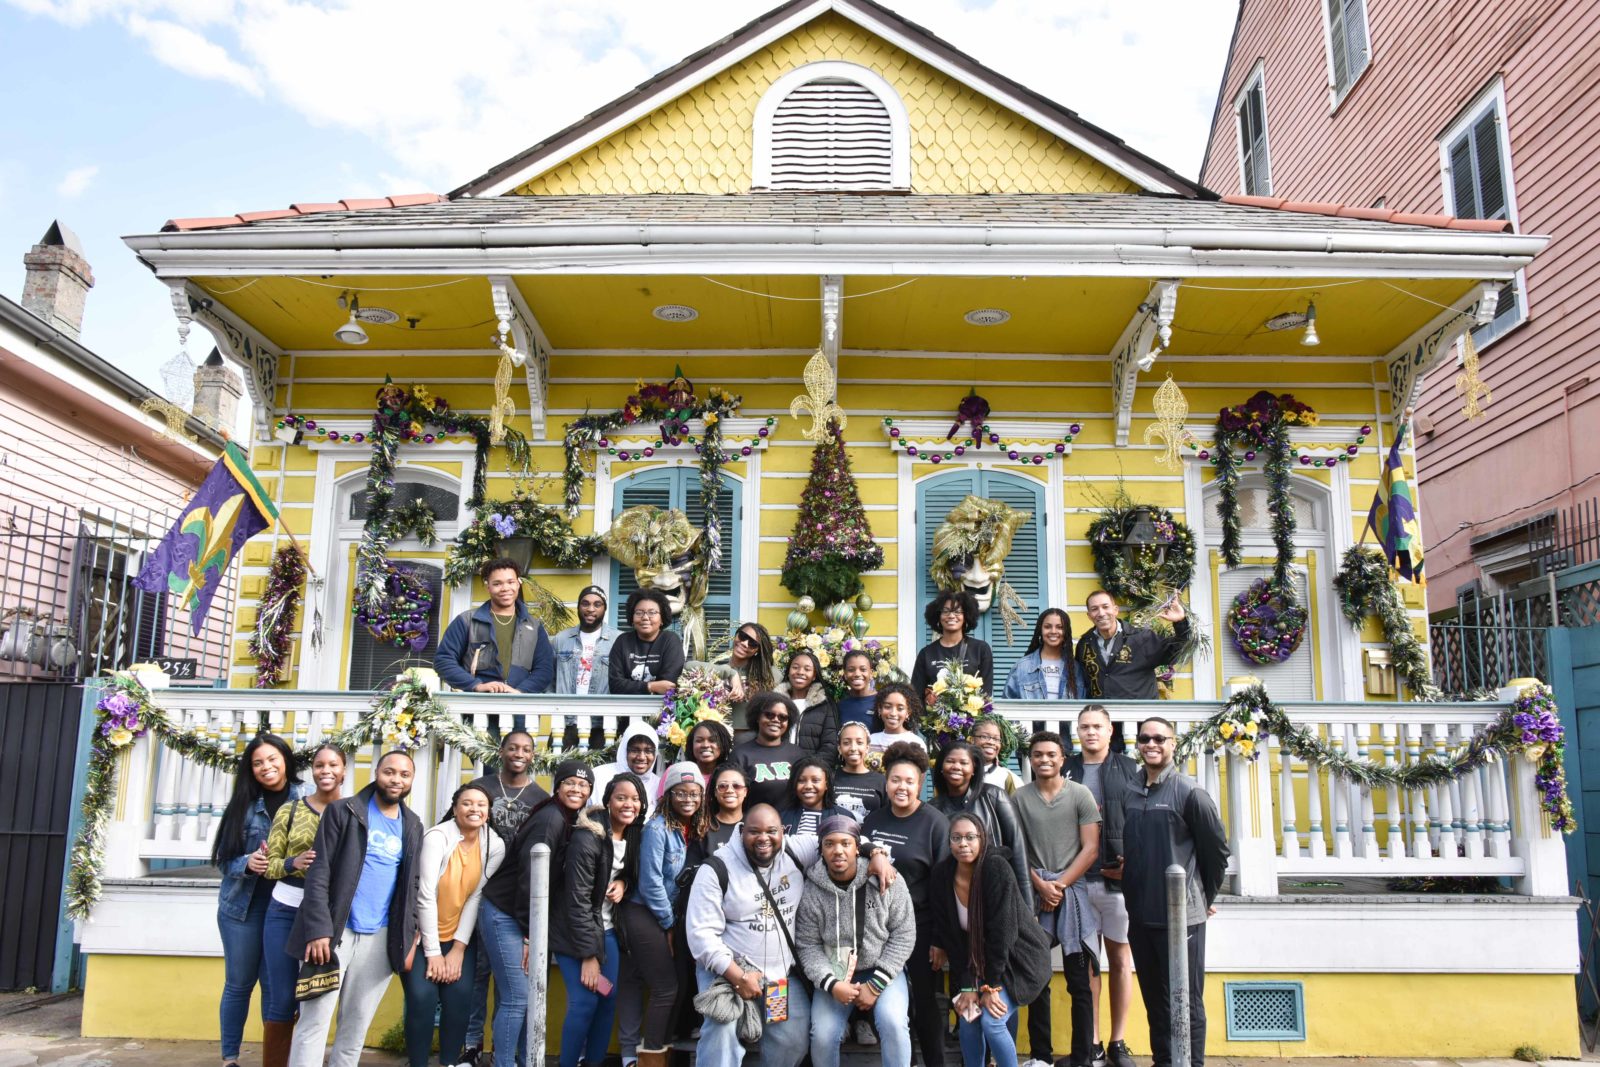 Students on the Black History Immersion Excursion standing in front of a home in the French Quarter decorated for Mardi Gras (Rosevelt Noble/Vanderbilt)